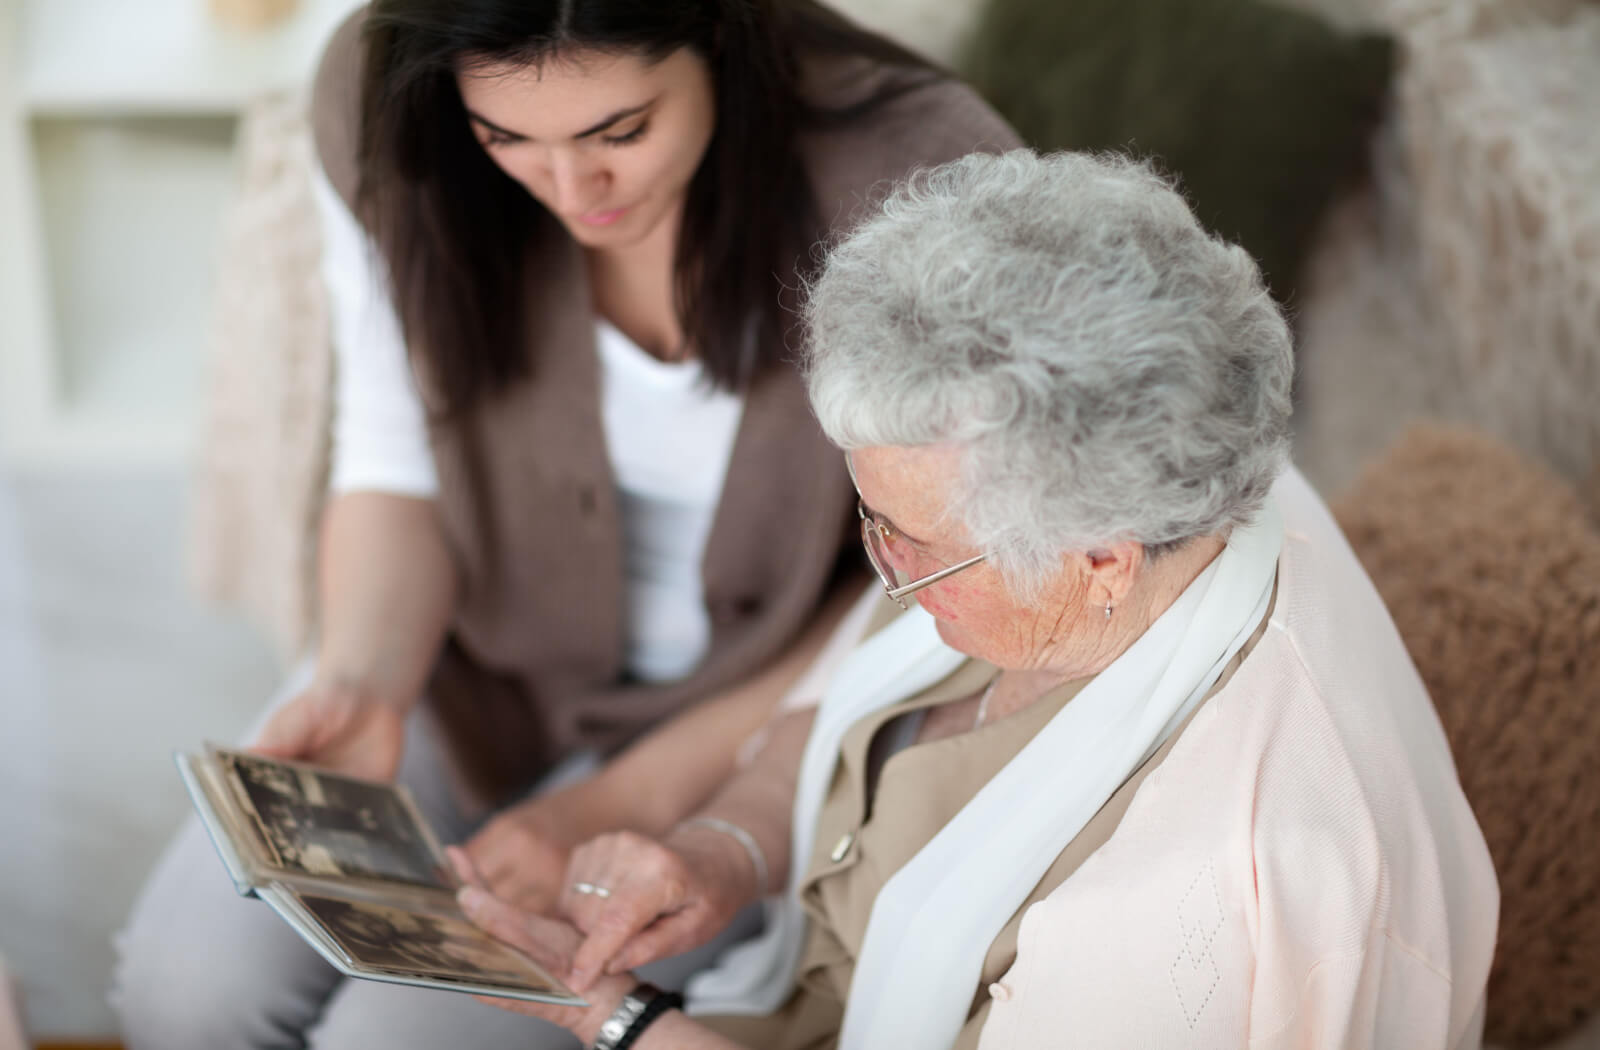 A young woman looking through a photo album with her senior.